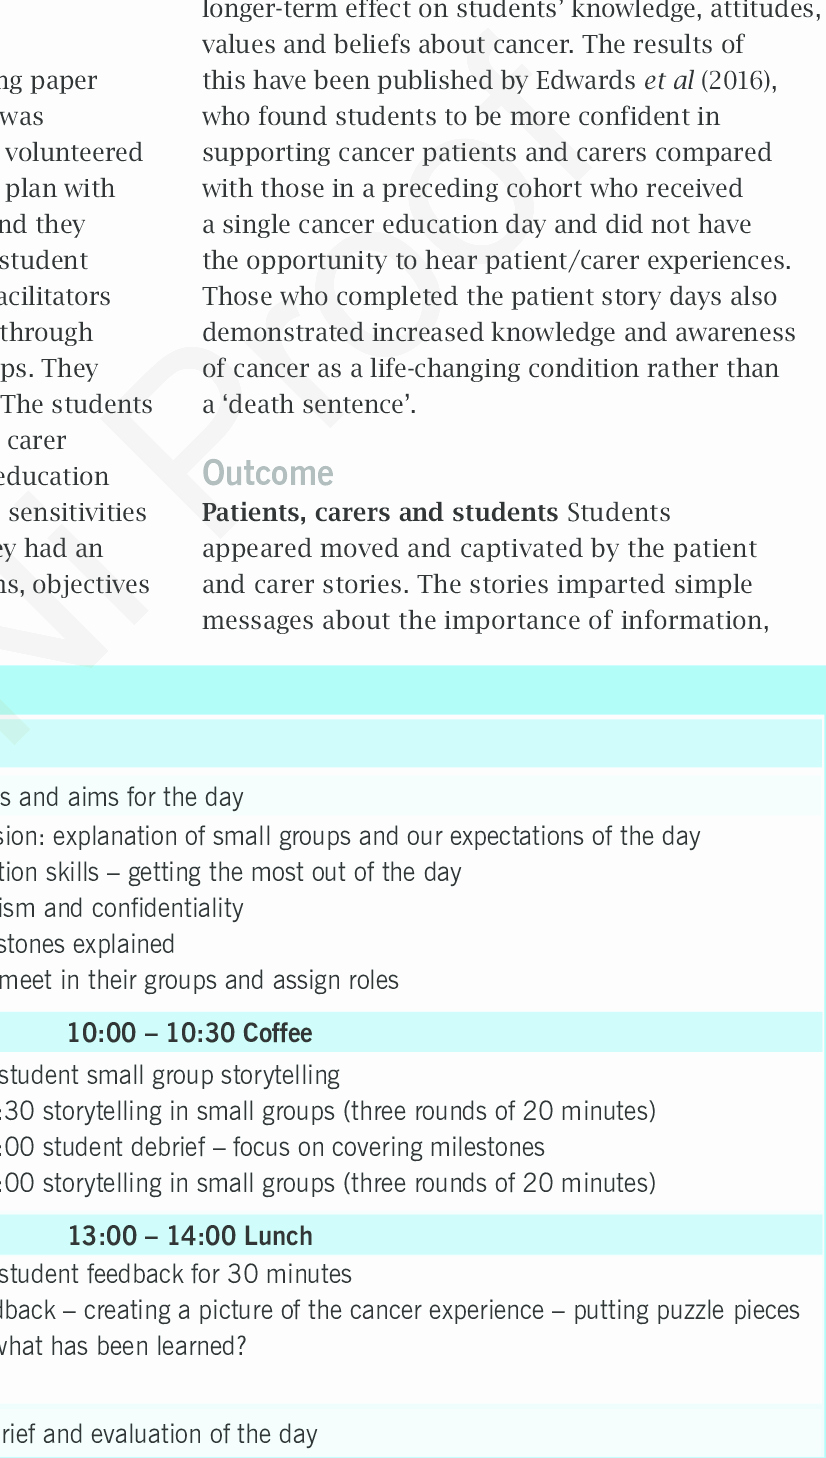 Patient Teaching Plan Examples Lovely Timetable and Teaching Plan Patient and Carer Stories